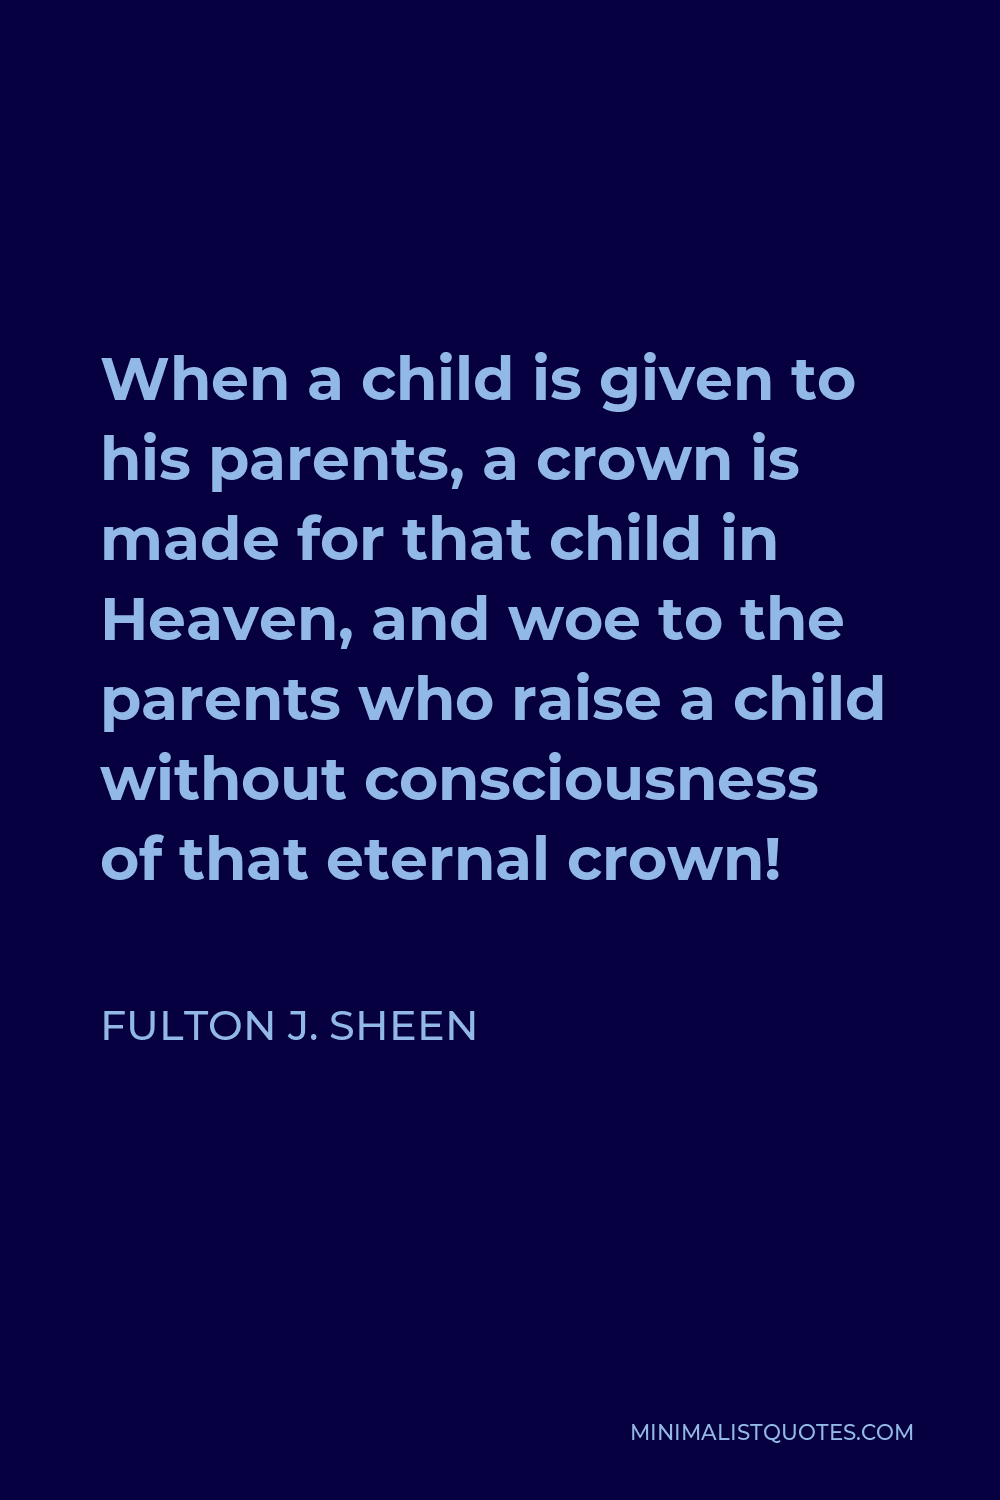 Fulton J. Sheen Quote - When a child is given to his parents, a crown is made for that child in Heaven, and woe to the parents who raise a child without consciousness of that eternal crown!